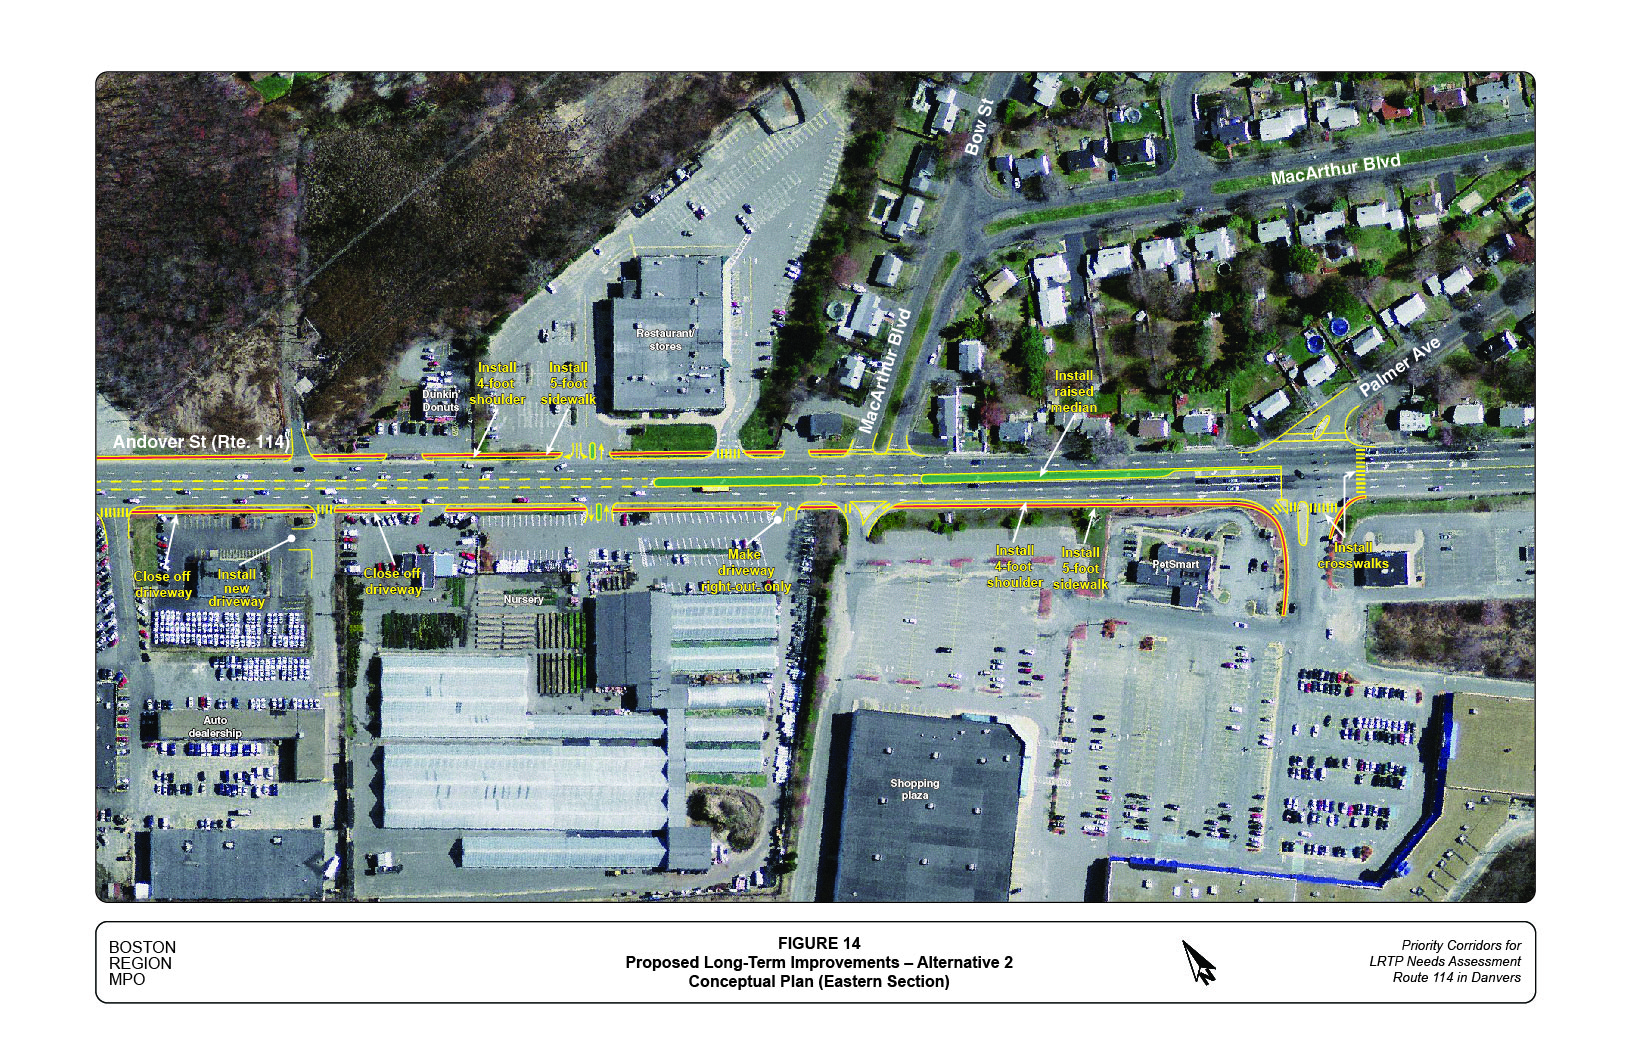 Figure 14 shows the locations and layouts of the proposed long-term improvements in Alternative 2 in the eastern section of the study corridor. 